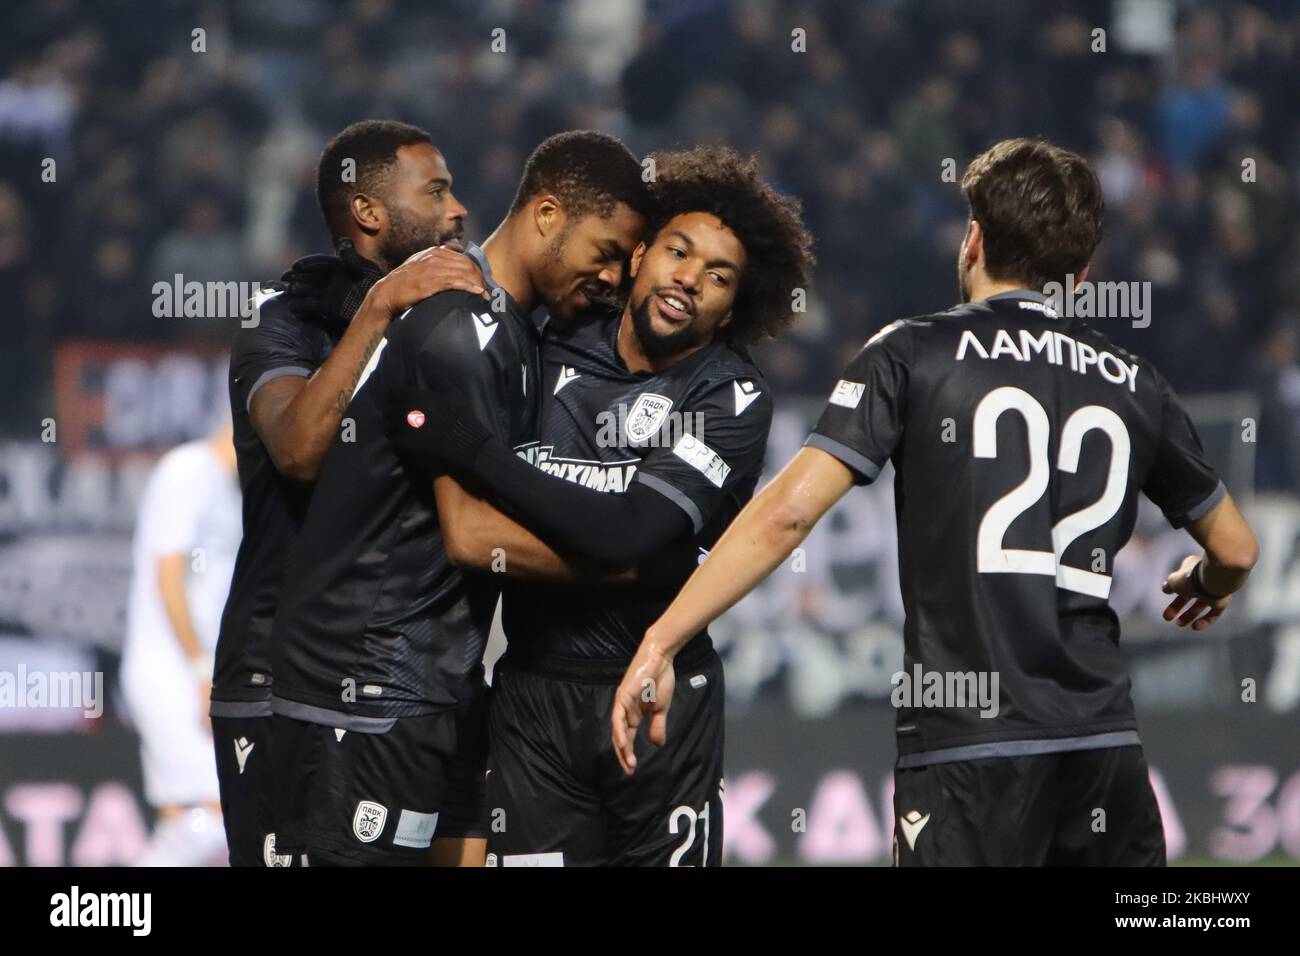 Chuba Amechi Akpom #47 striker of PAOK FC celebrating with his teammates his second goal during PAOK Thessaloniki v OFI Crete FC with final score 4-0 for Super League 1 Greece at Toumba Stadium home of PAOK in Thessaloniki. Akpom scored the first and second (penalty) of PAOK. Chuba Akpom is an English professional footballer striker player with previous career in Arsenal and as a loan to Brentford, Coventry City, Nottingham Forest, Hull City, Brighton, Hove Albion and Sint-Truiden. He had also participations in the young national teams of England U16, U17, U18, U19, U20, U21. February 9, 2020  Stock Photo